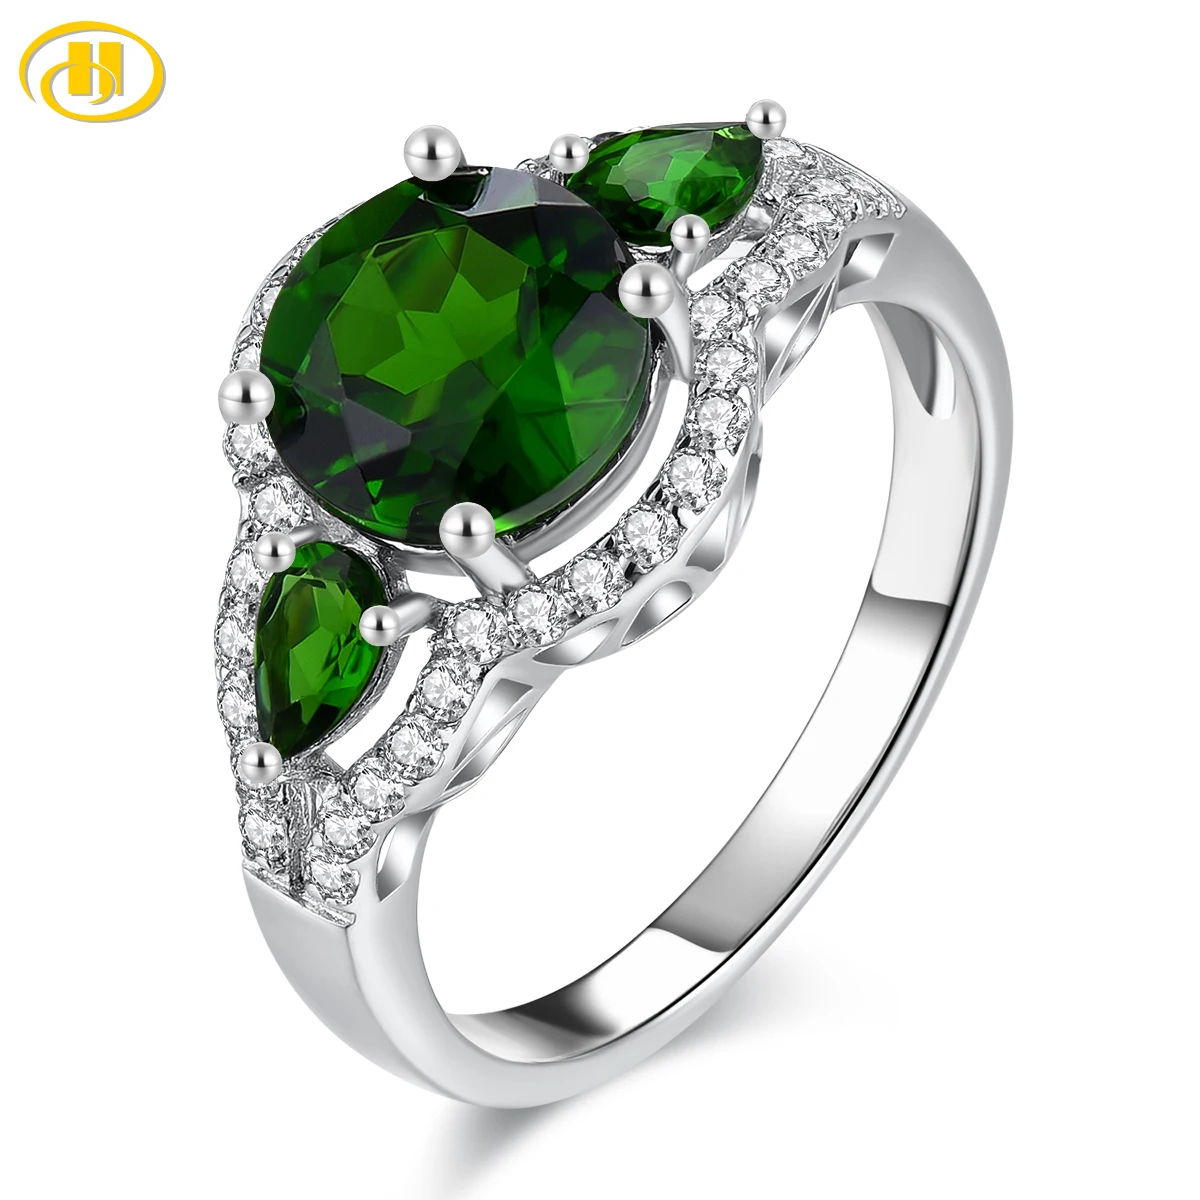 

Stock Clearance Natural Chrome Diopside Sterling Silver Rings 2.6 Carats Genuine Gemstone Deep Green S925 Jewelrys Women Gifts